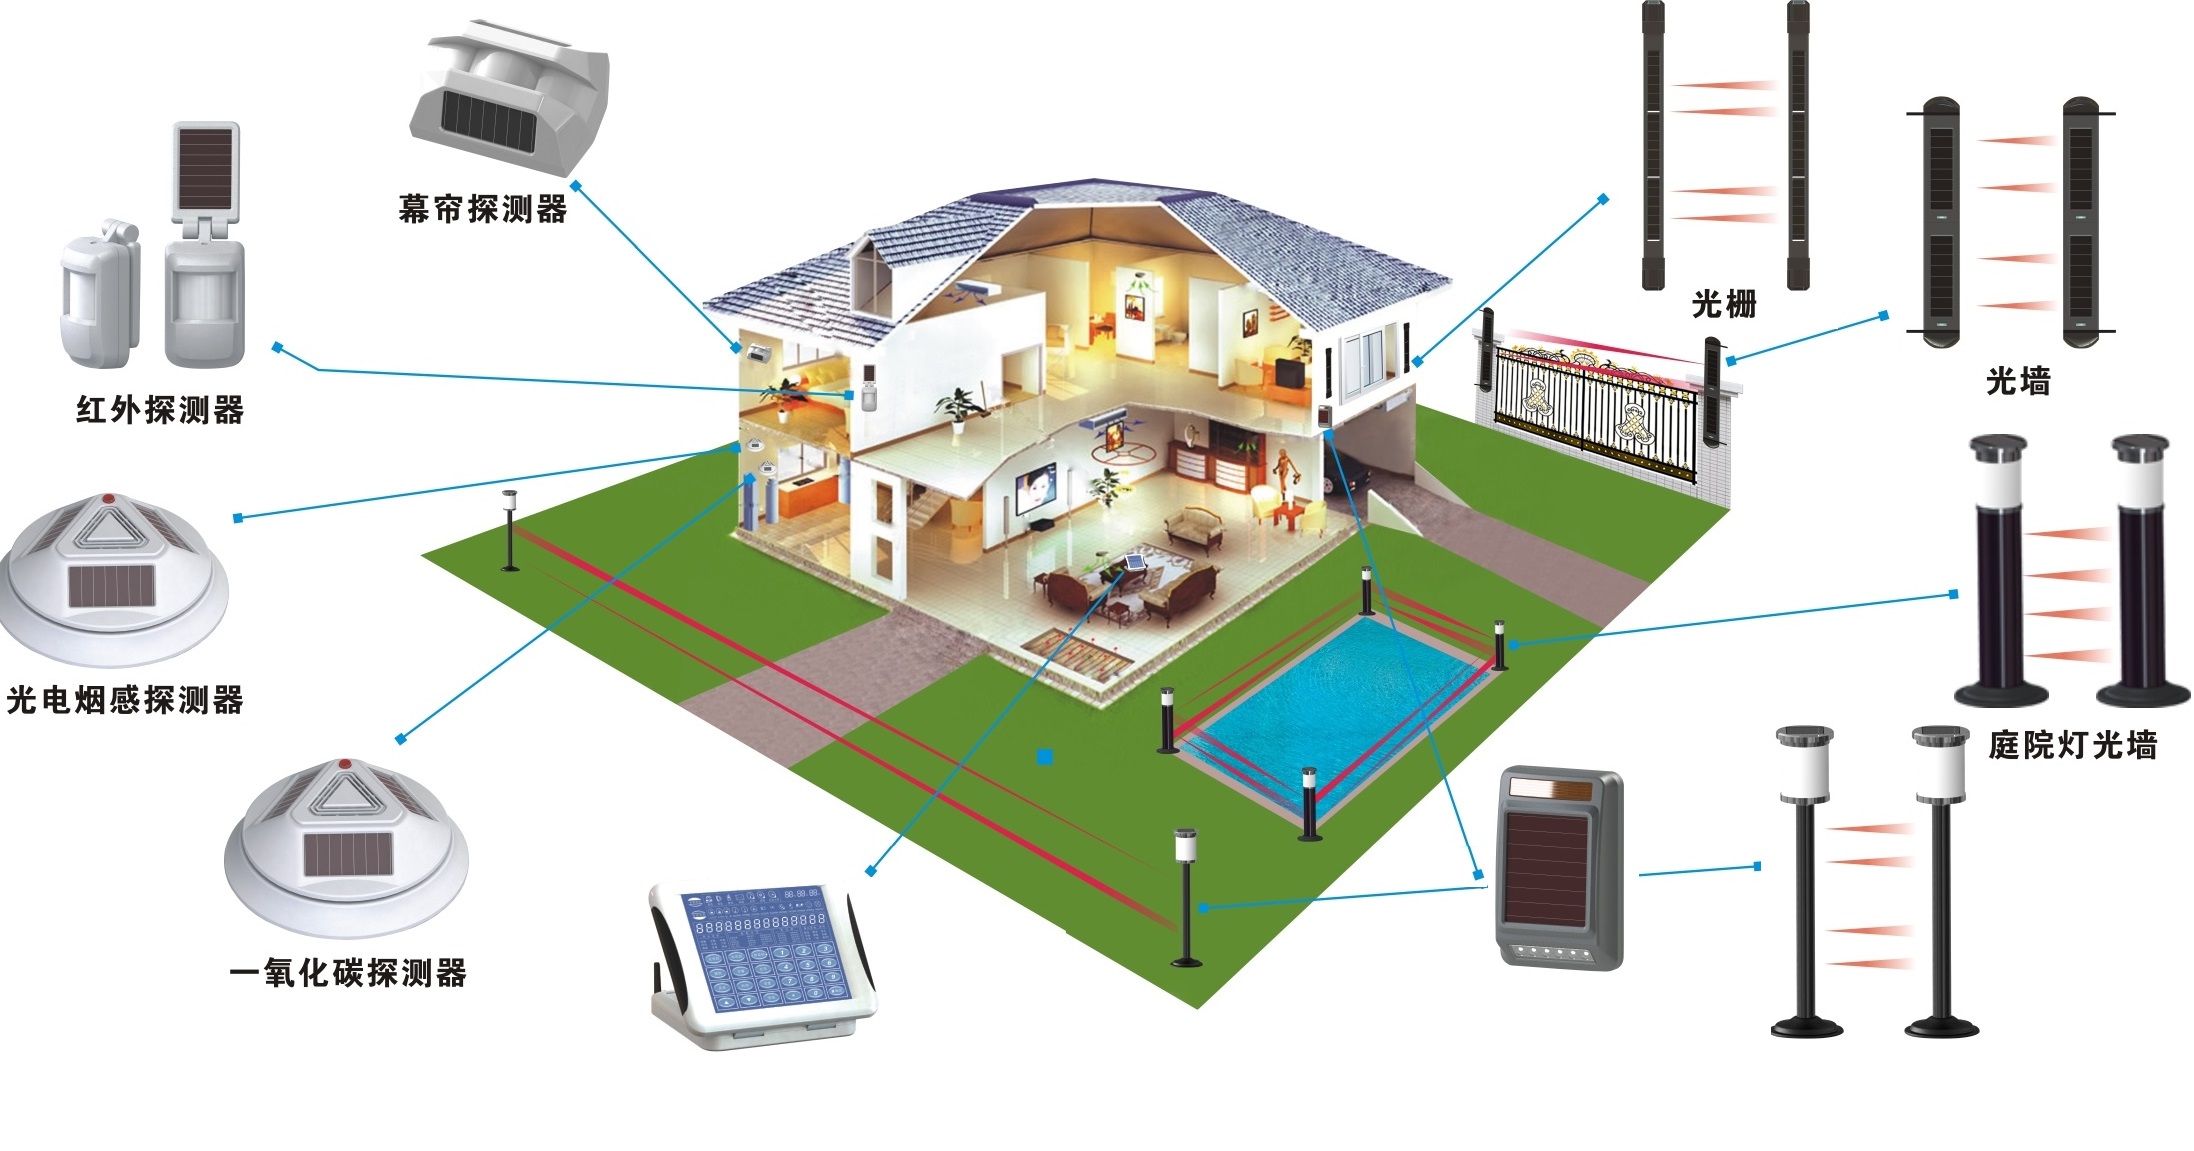 Villa security solution and equipment